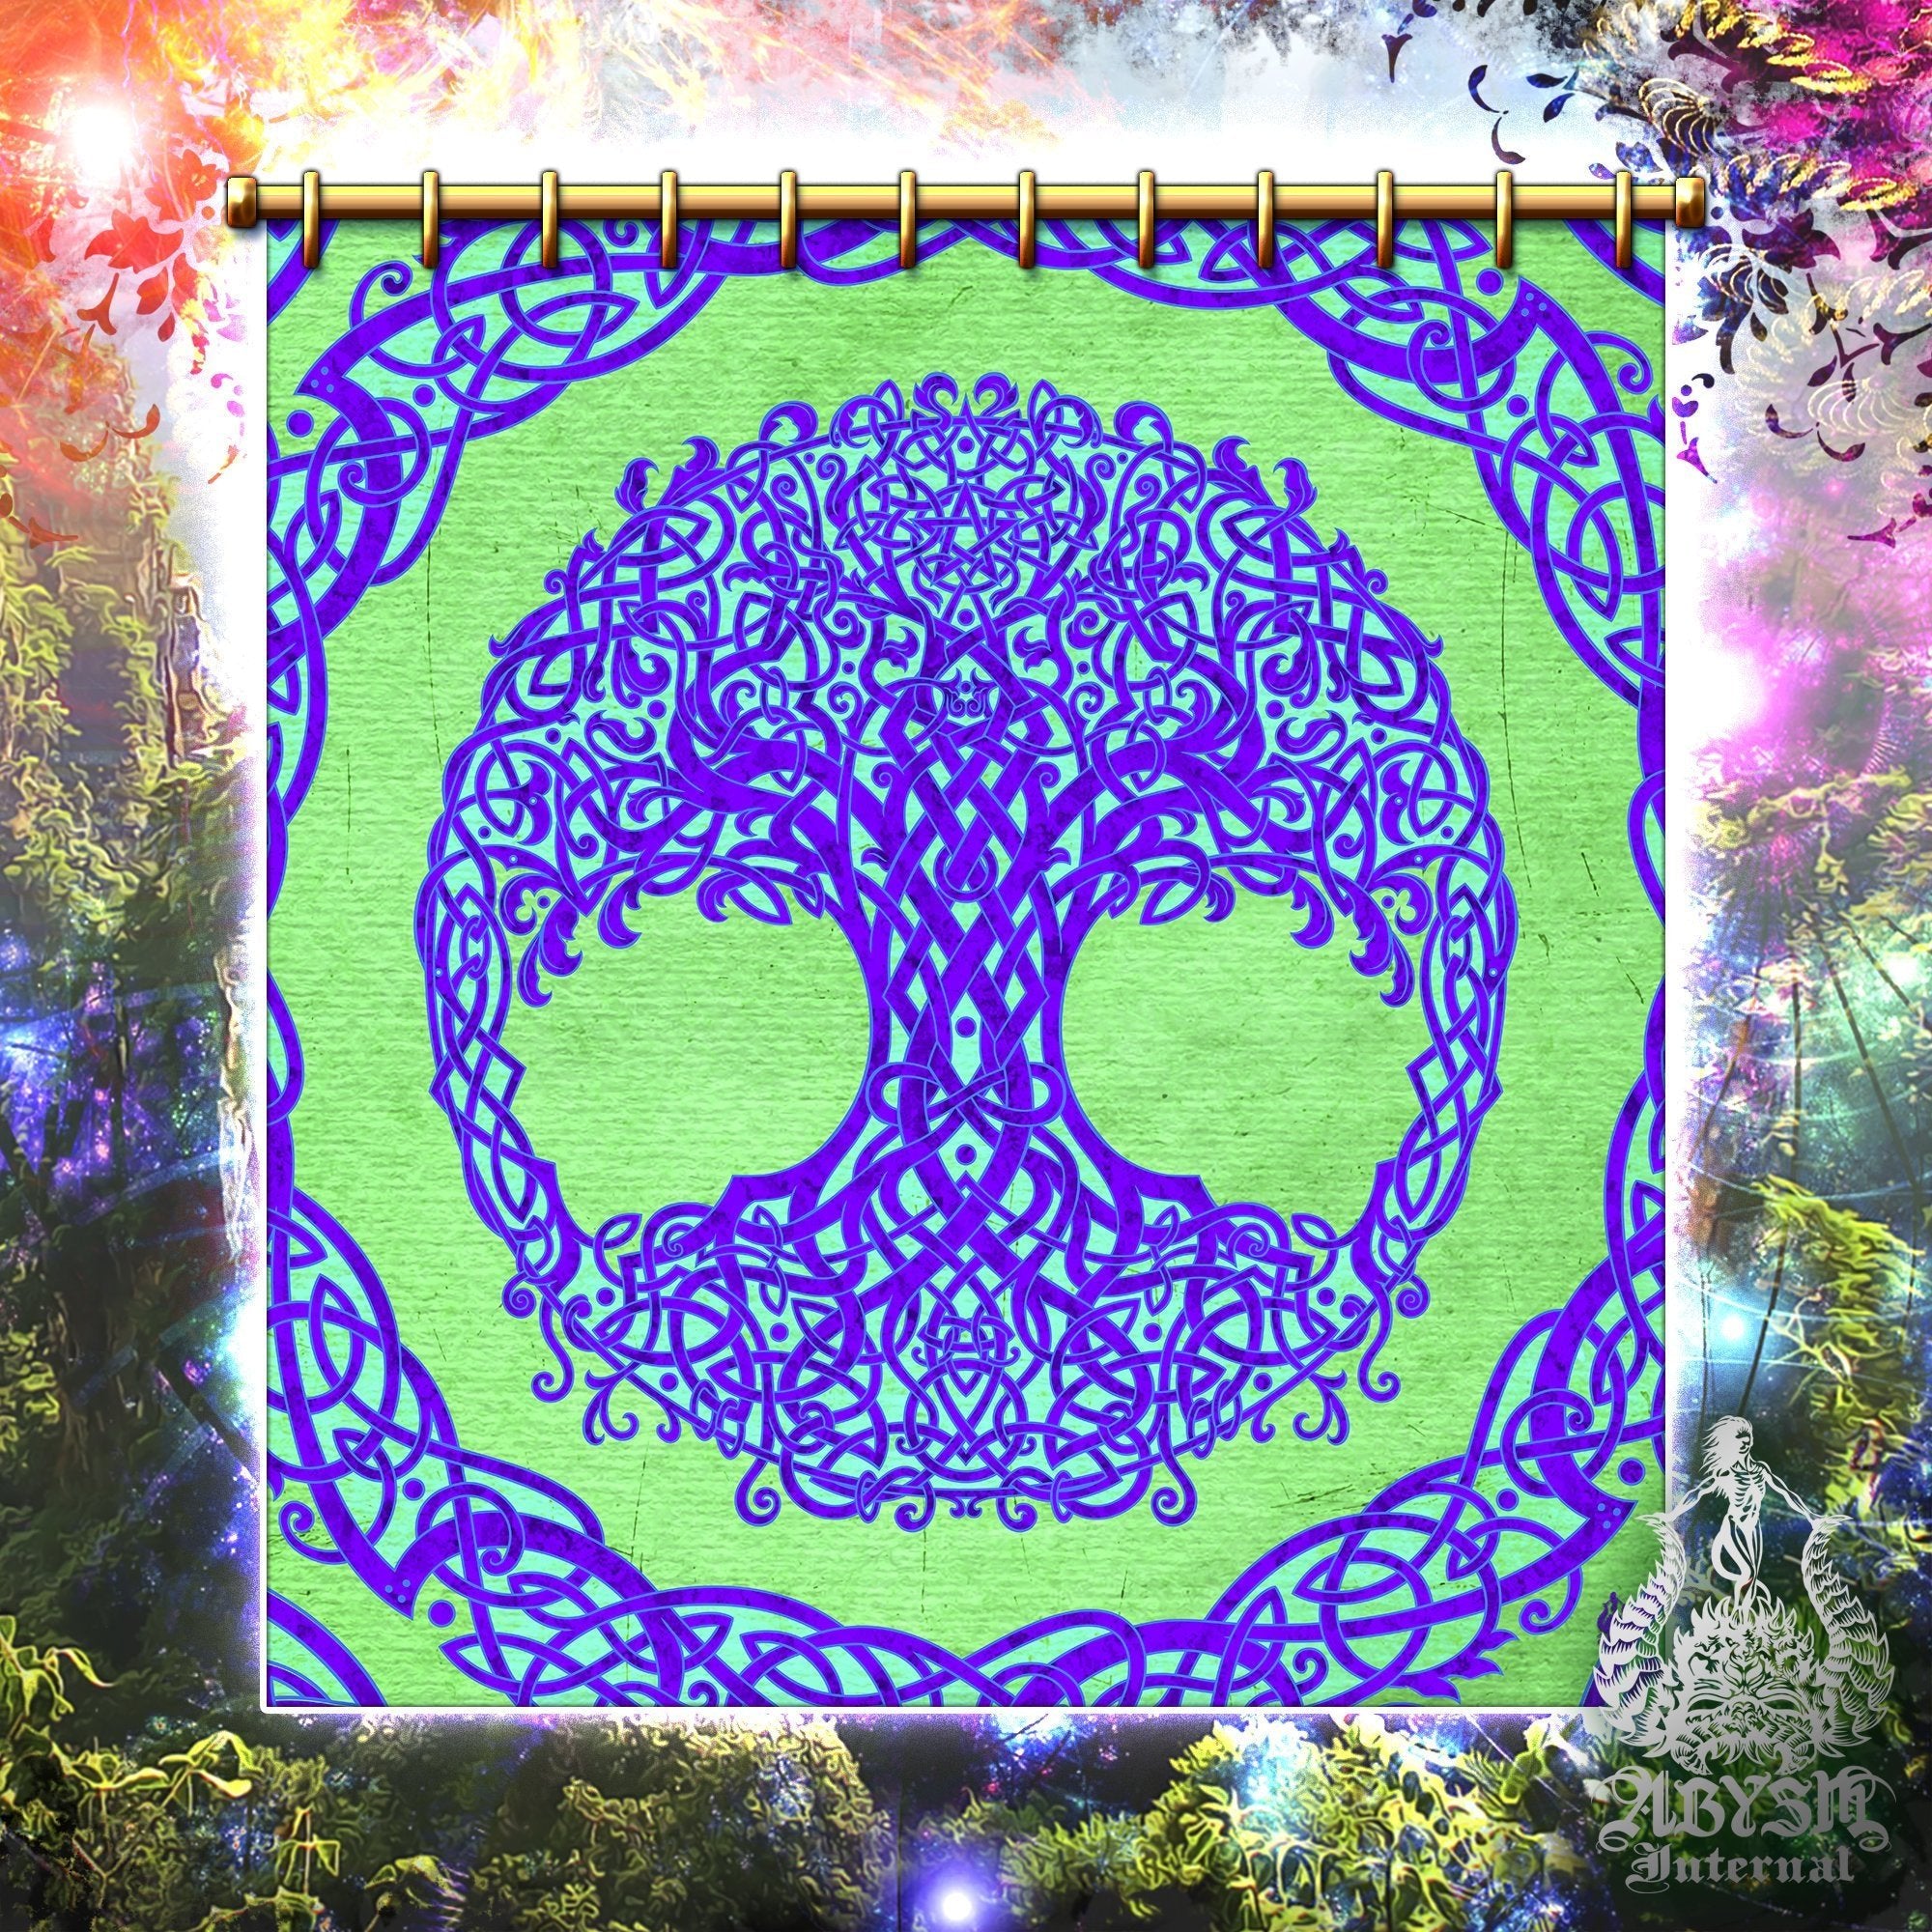 Tree of Life Shower Curtain, Boho and Pagan Bathroom Decor, Celtic Knot, Eclectic and Funky Home - Psy, Green & Purple - Abysm Internal